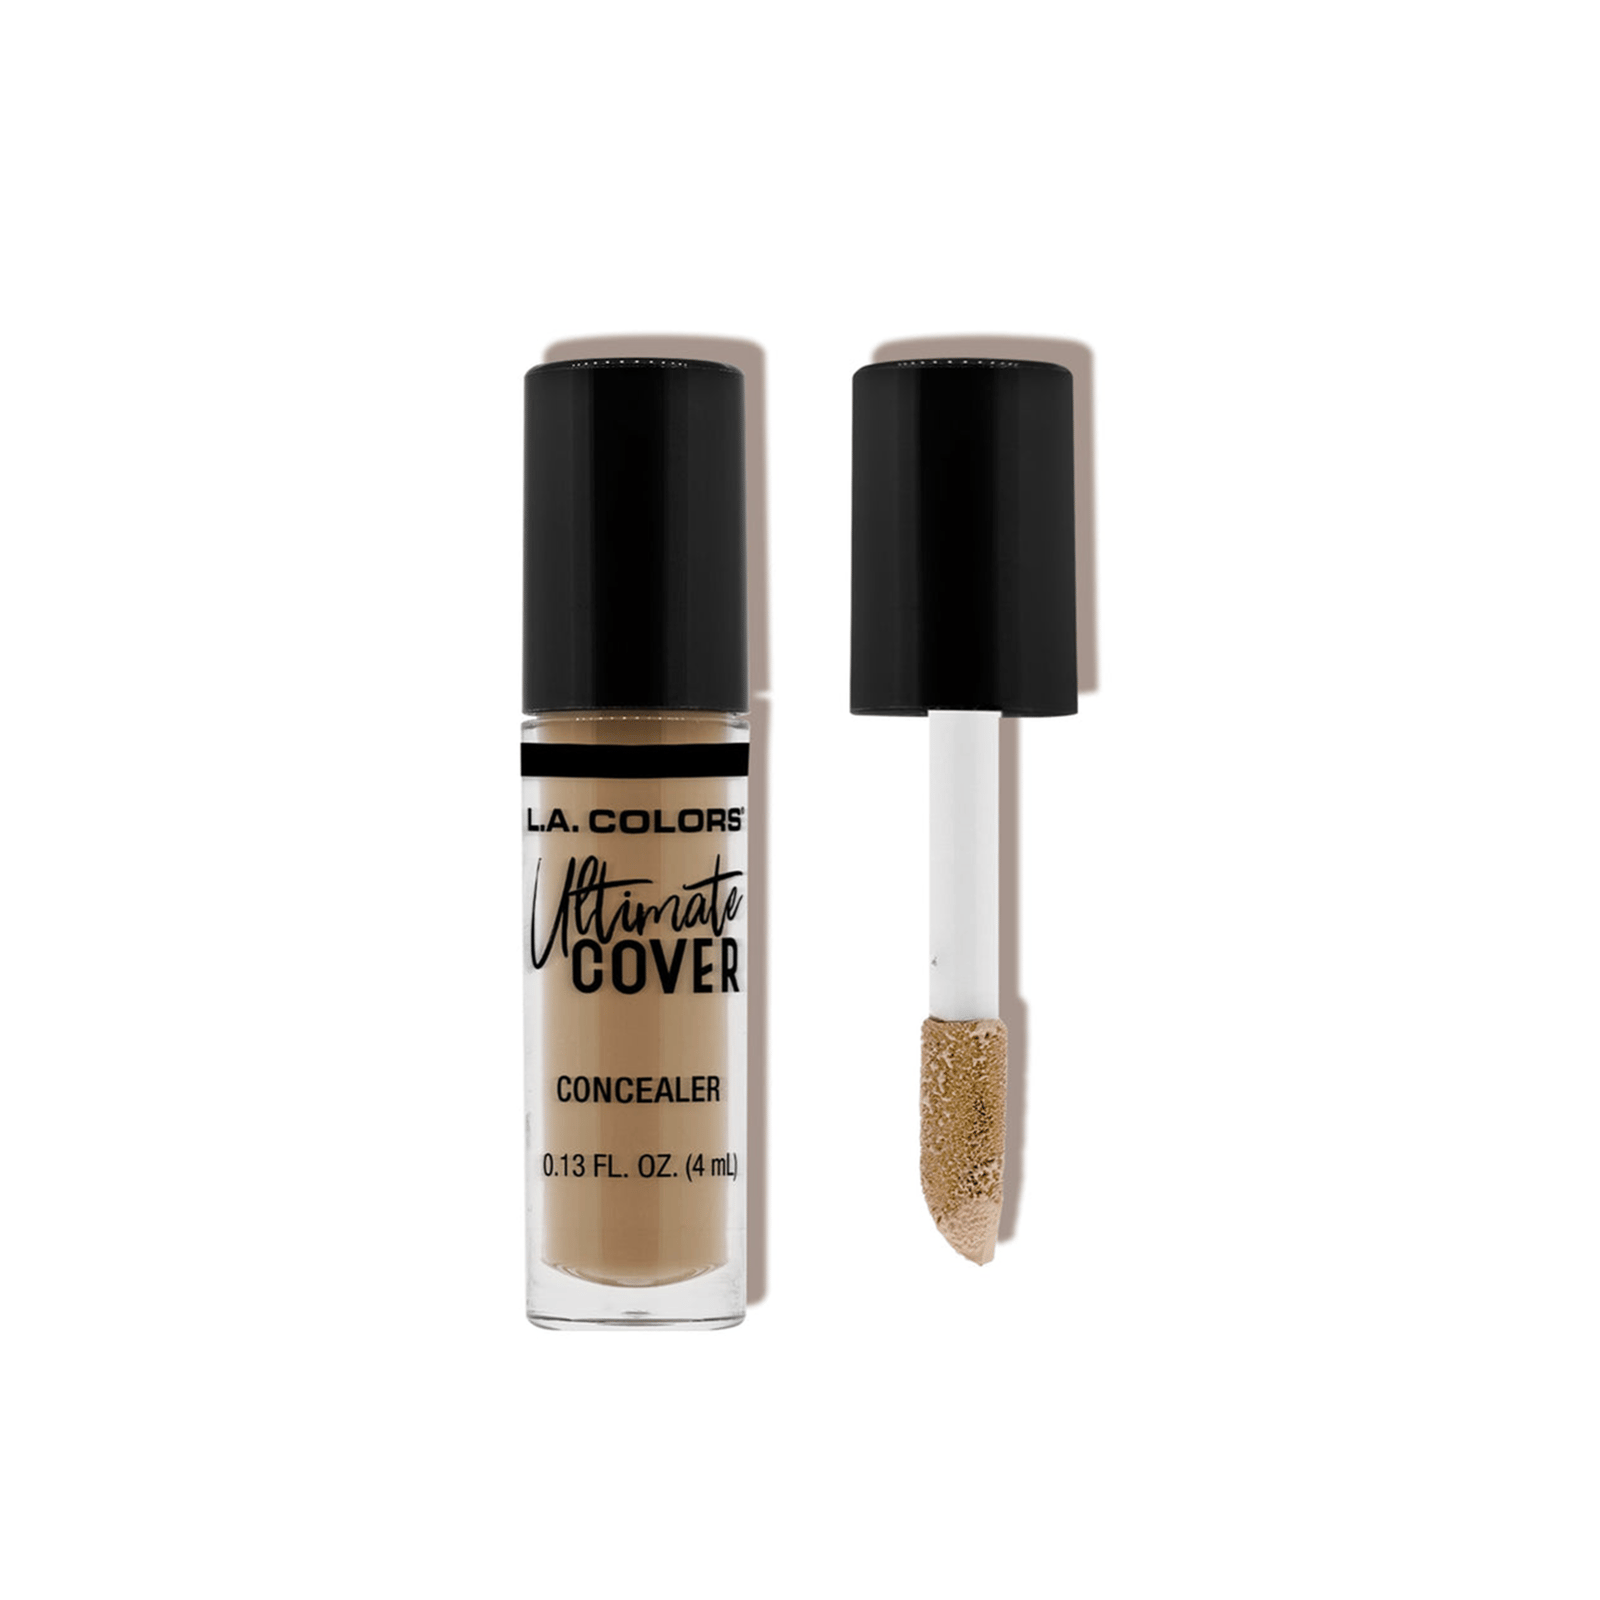 L.A. Colors Ultimate Cover Concealer CC909 Nude 4ml